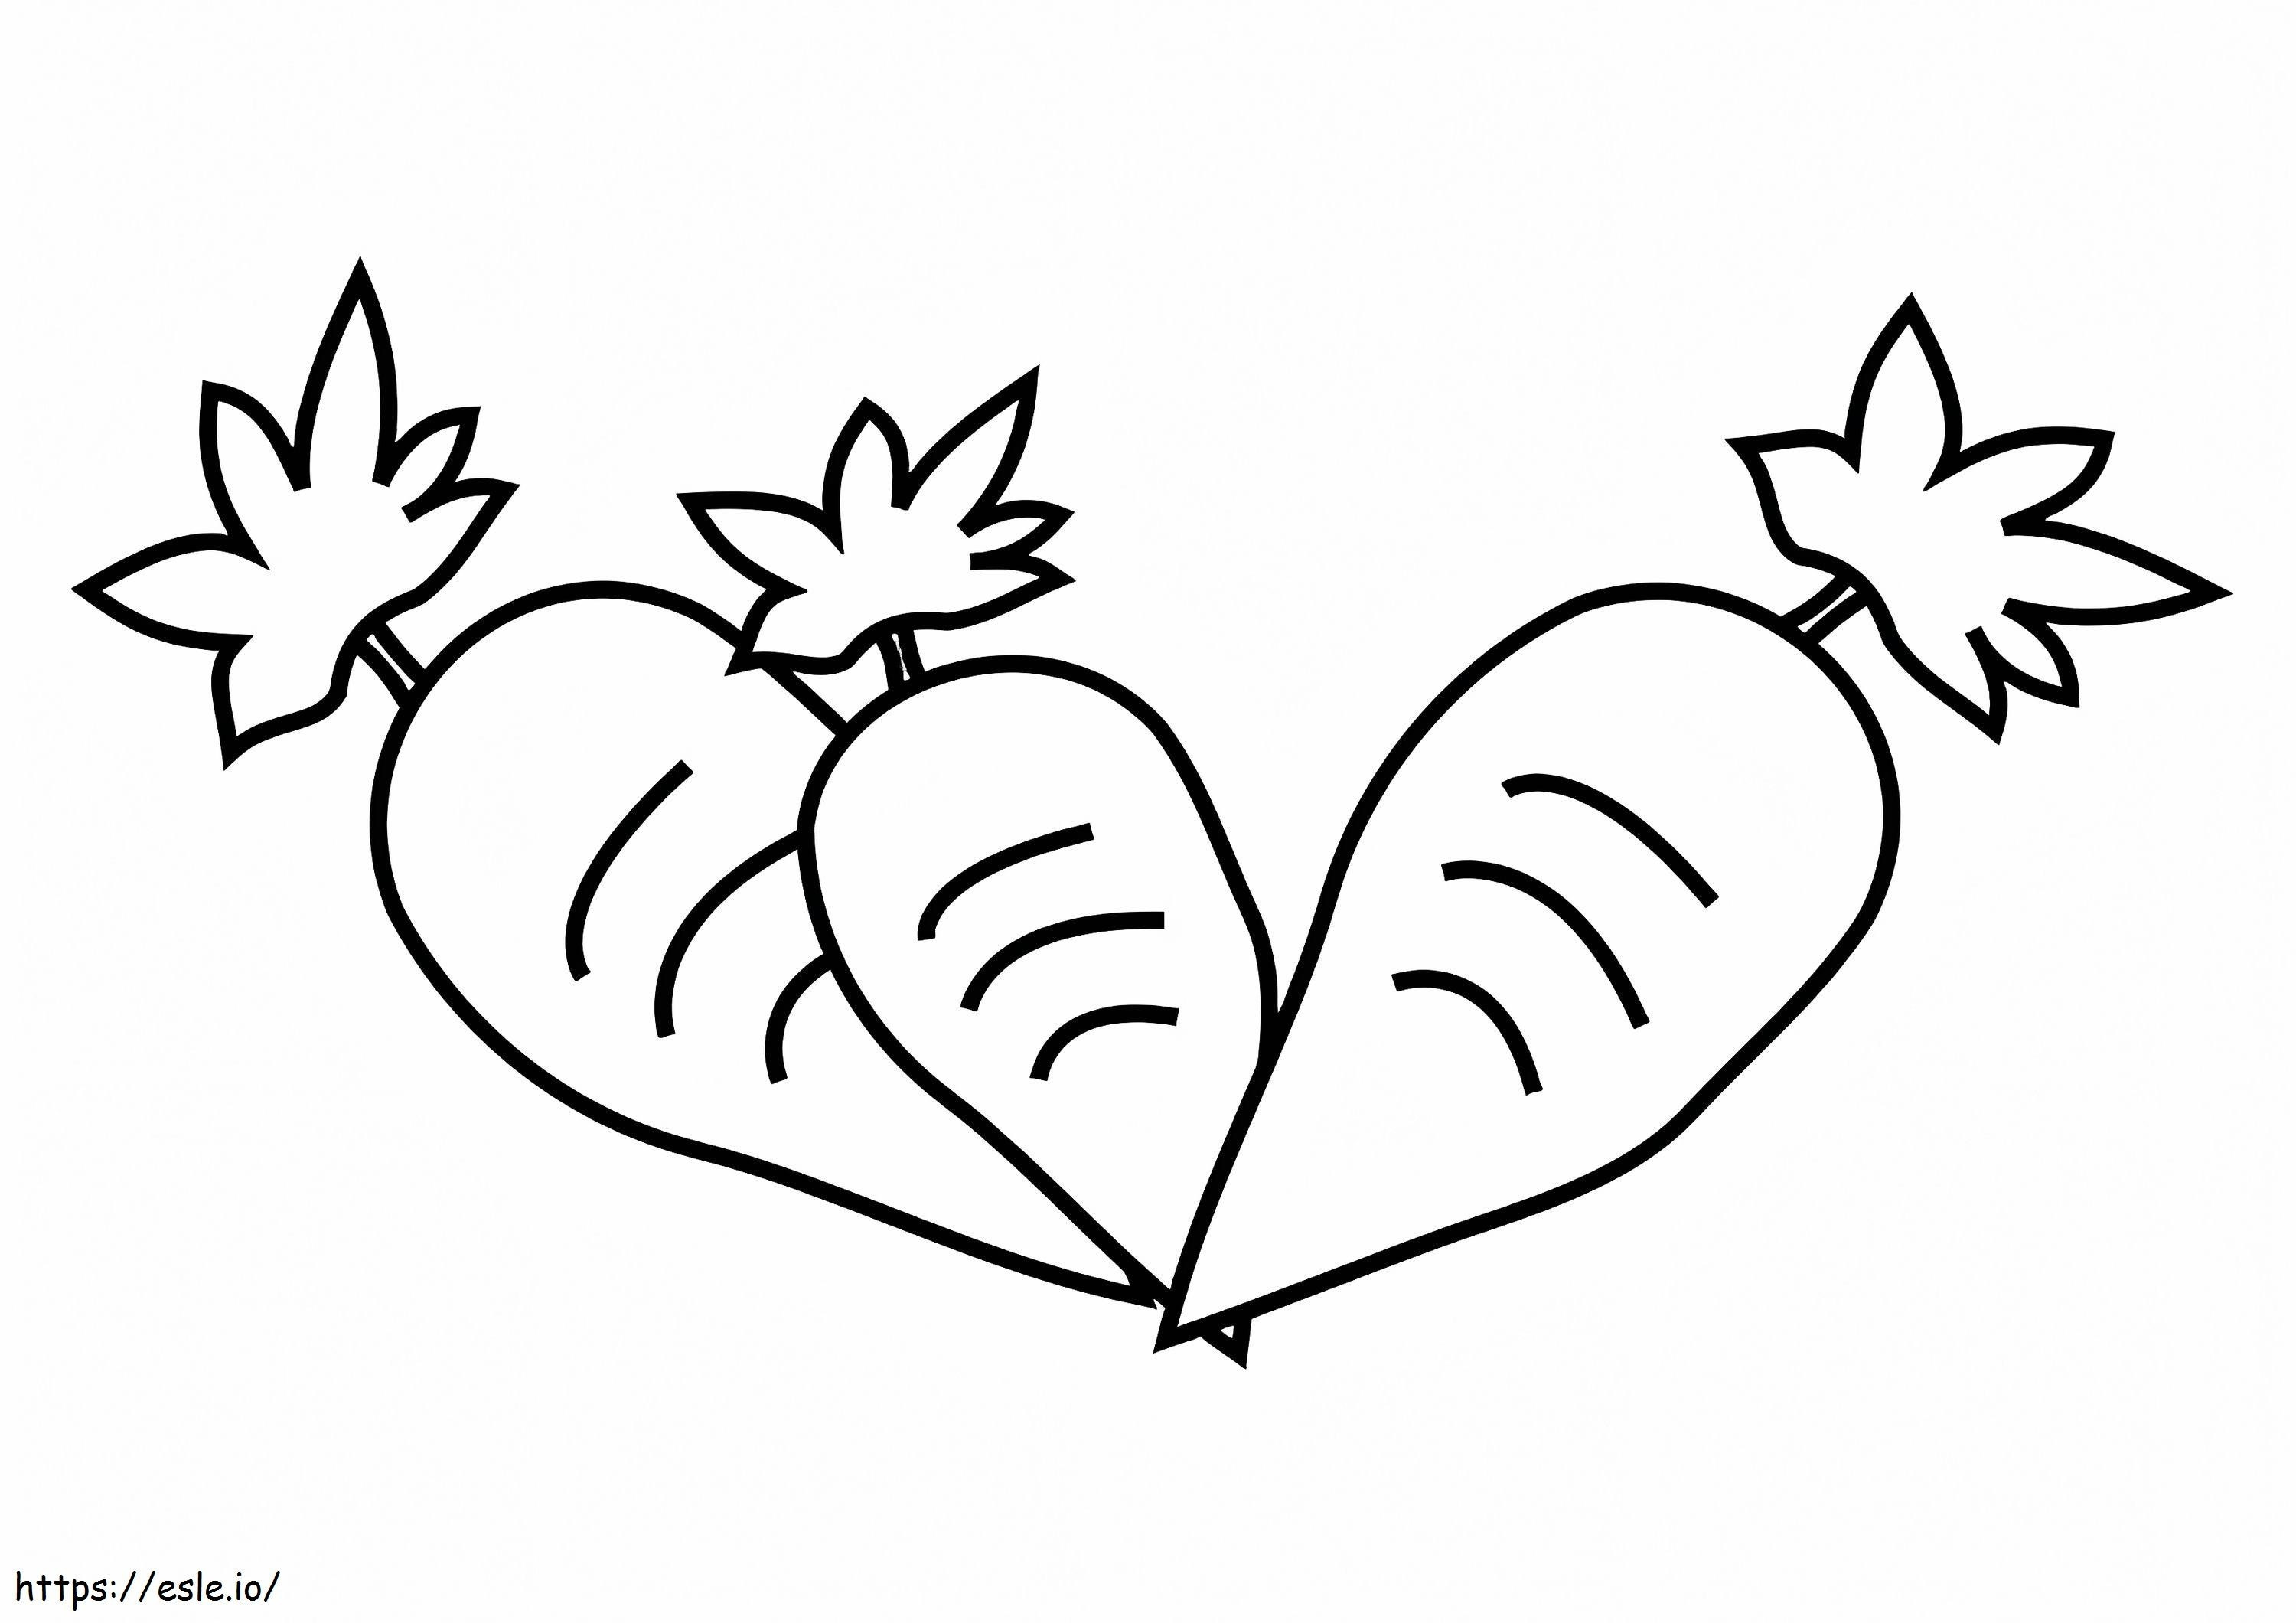 1528426687 The Carrots A4 E1600526940522 coloring page